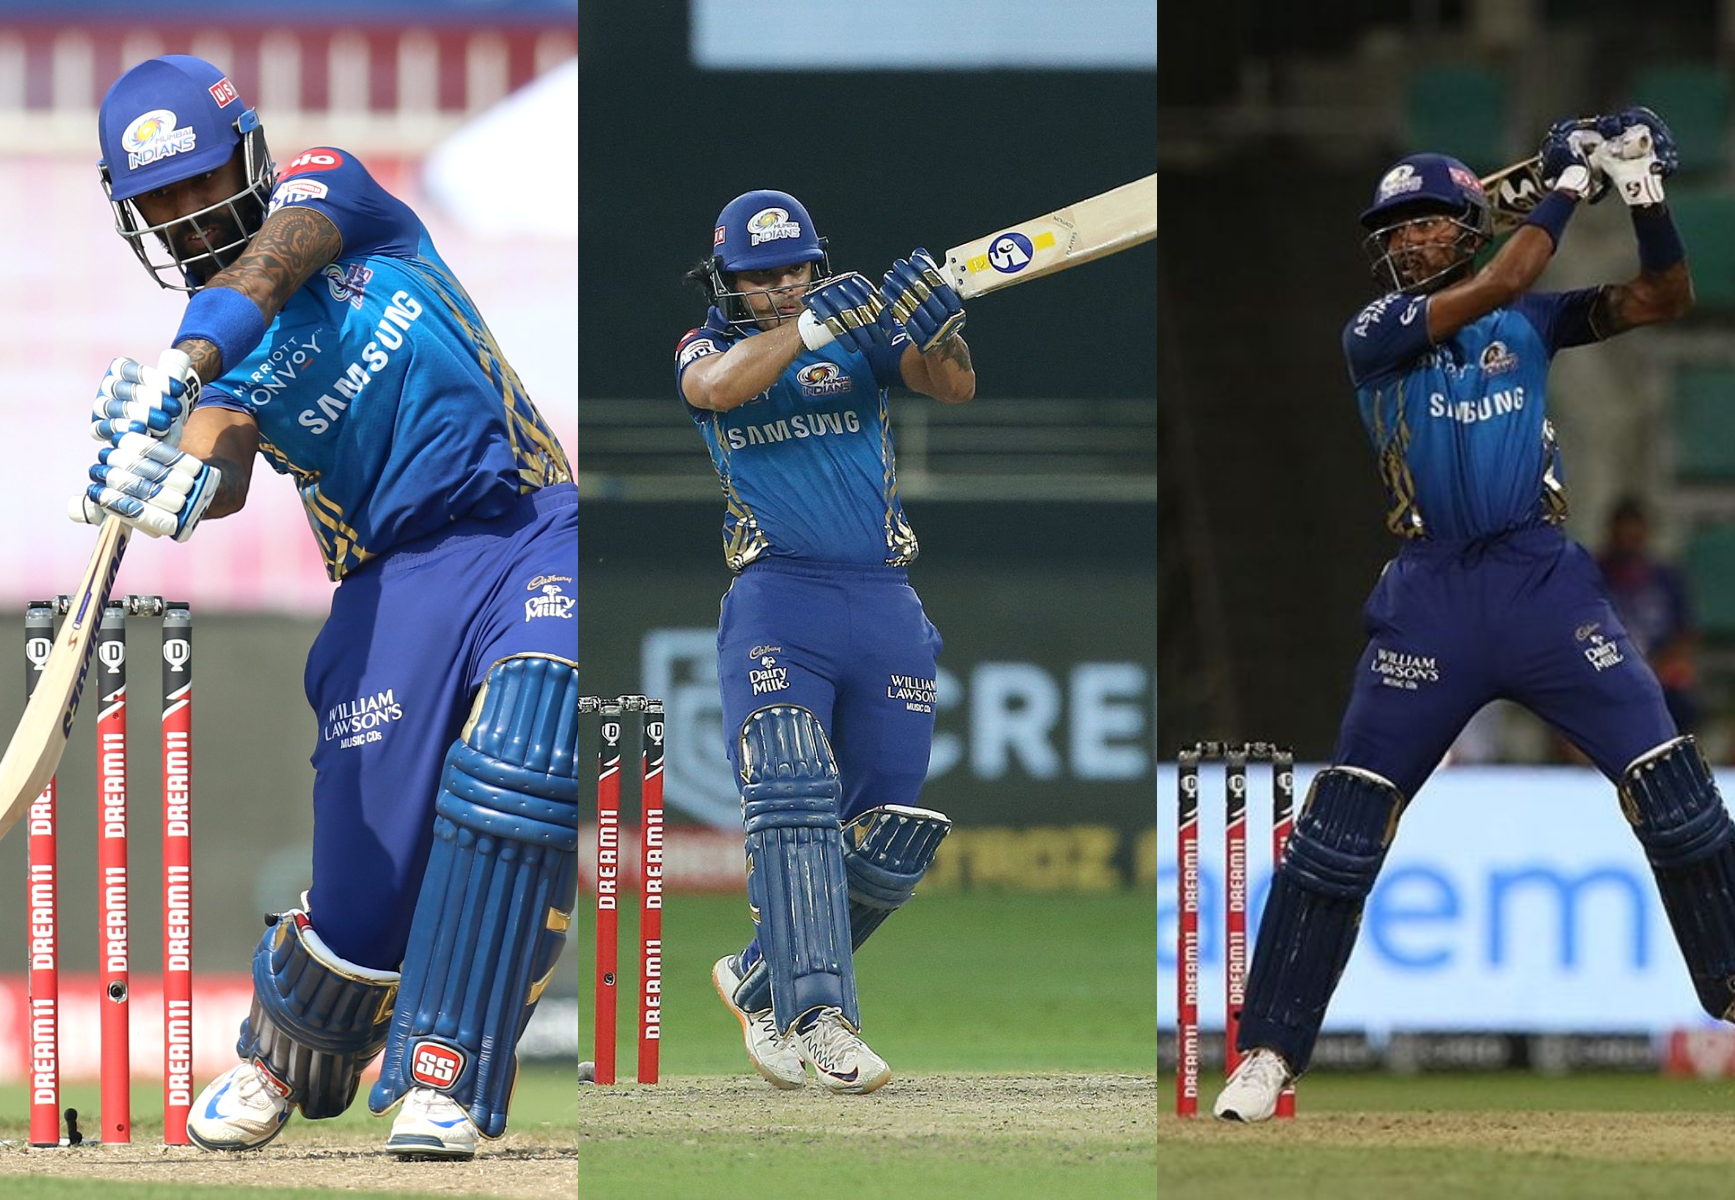 MI trio of Surya, Ishan and Hardik are the middle order of this XI  | BCCI/IPL